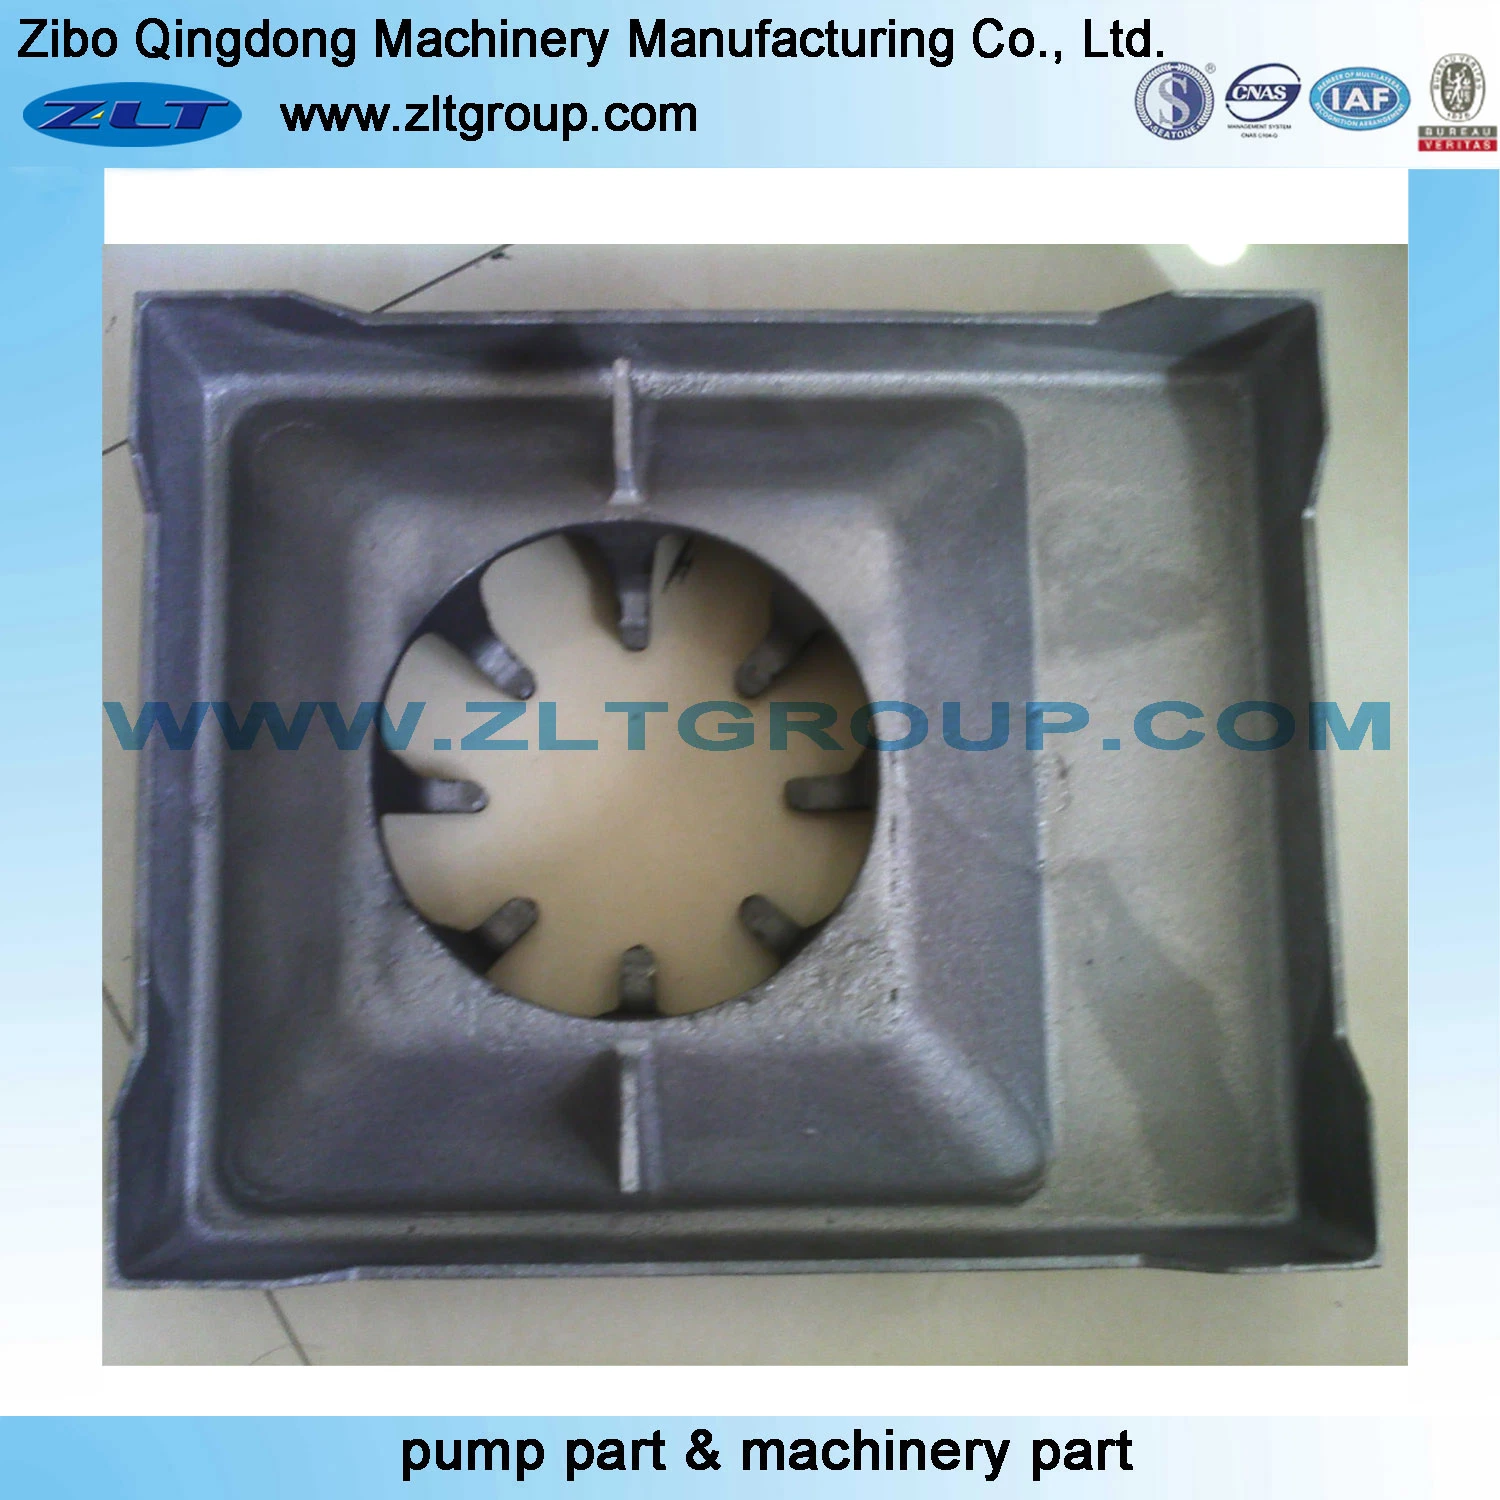 Precision Casting Stainless Steel CNC Machining Components for Machinery Industry in CD4/316